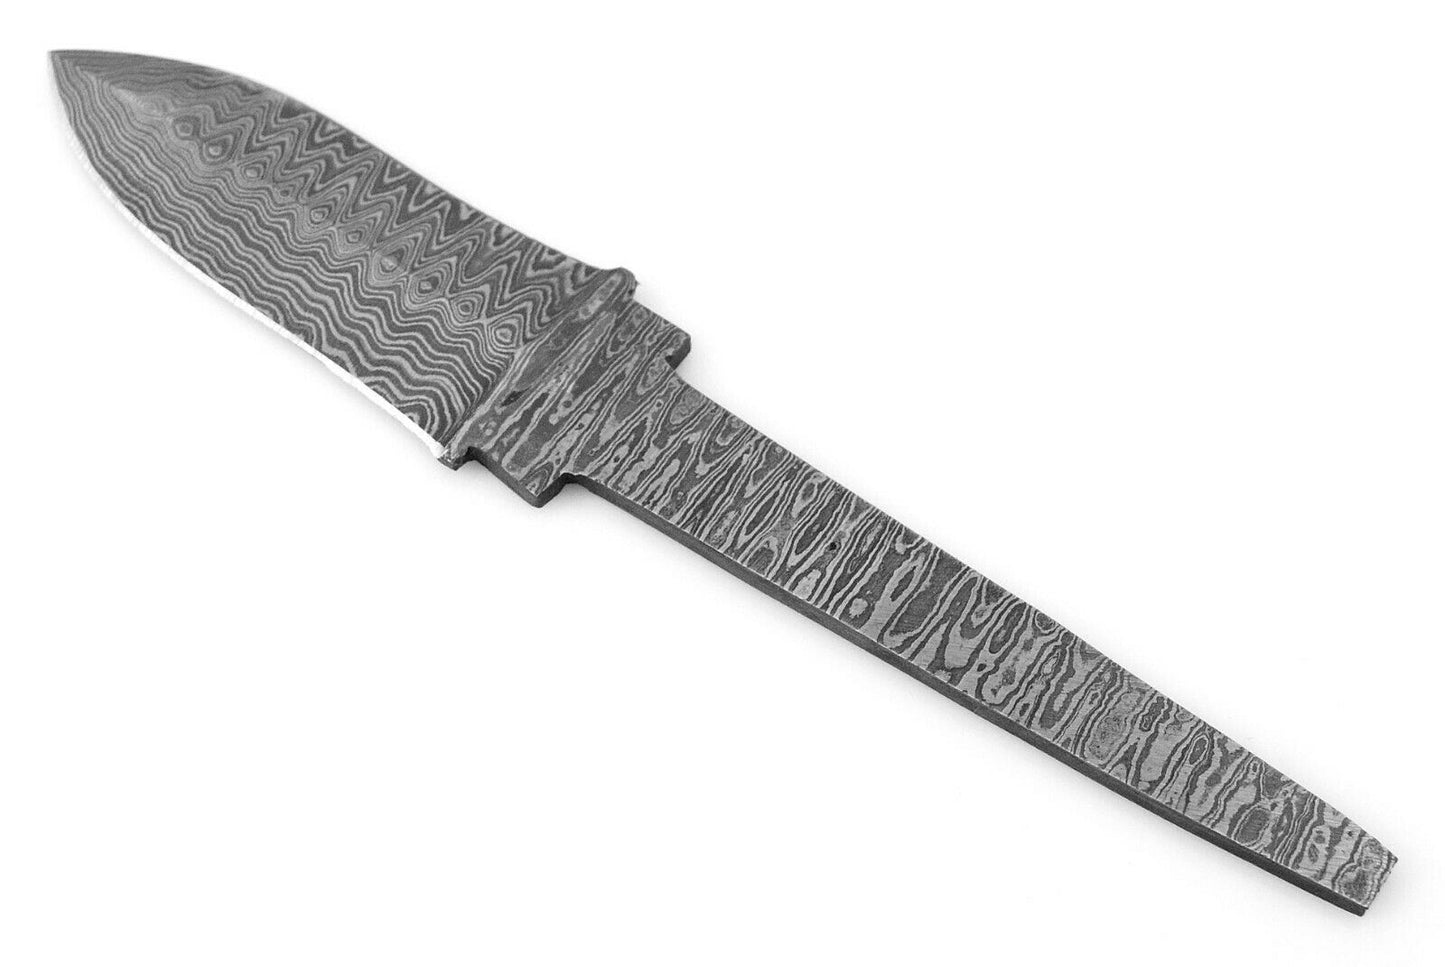 HAND FORGED Damascus Steel Dagger Rat Tail Blank Blade Knife Making Supply (820)